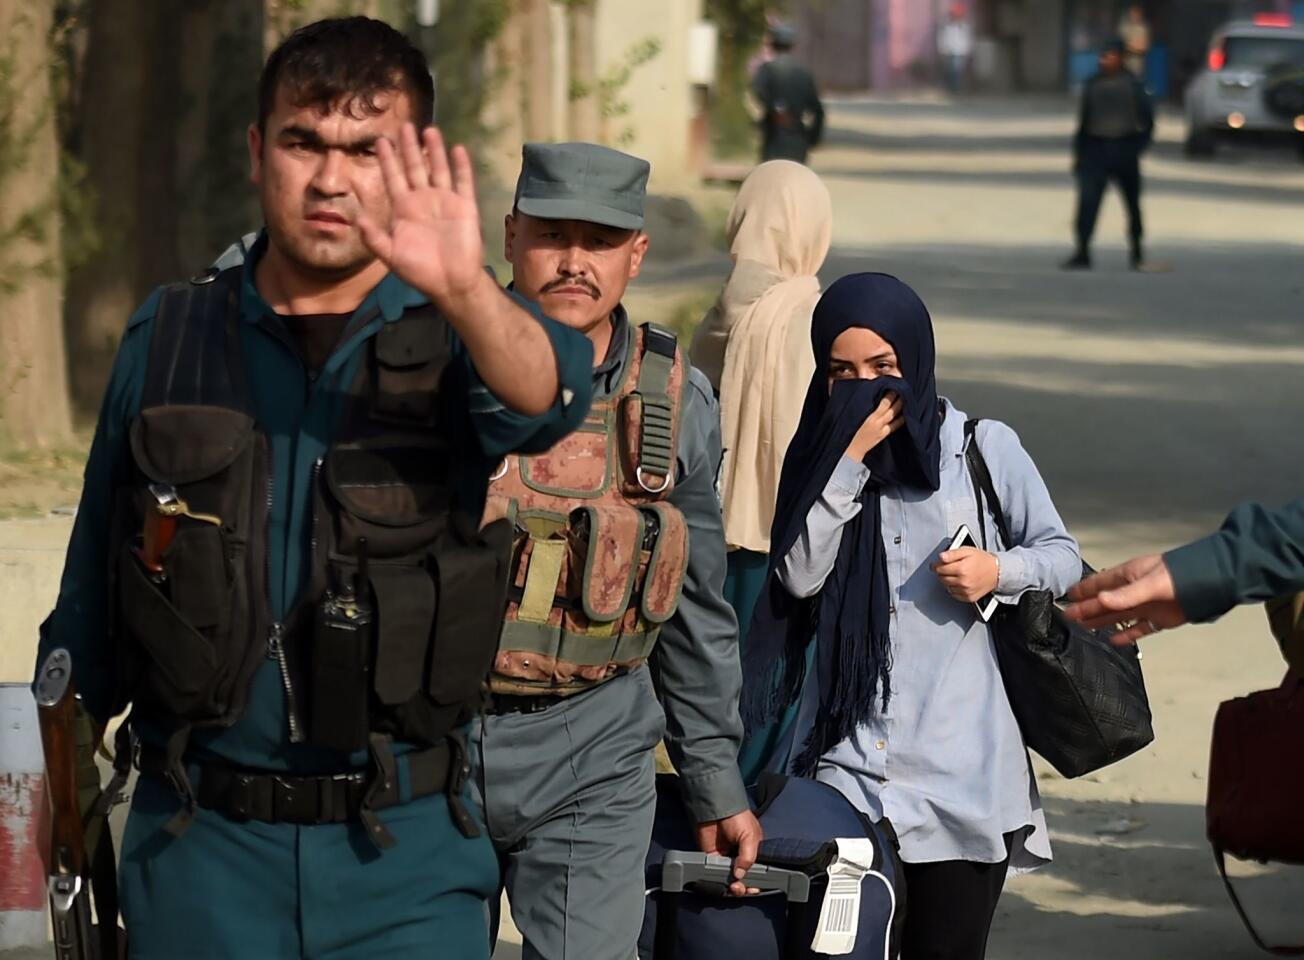 Afghan students from the American University are escorted by police forces at the end of a nearly 10-hour raid in Kabul, Afghanistan on August 25, 2016.